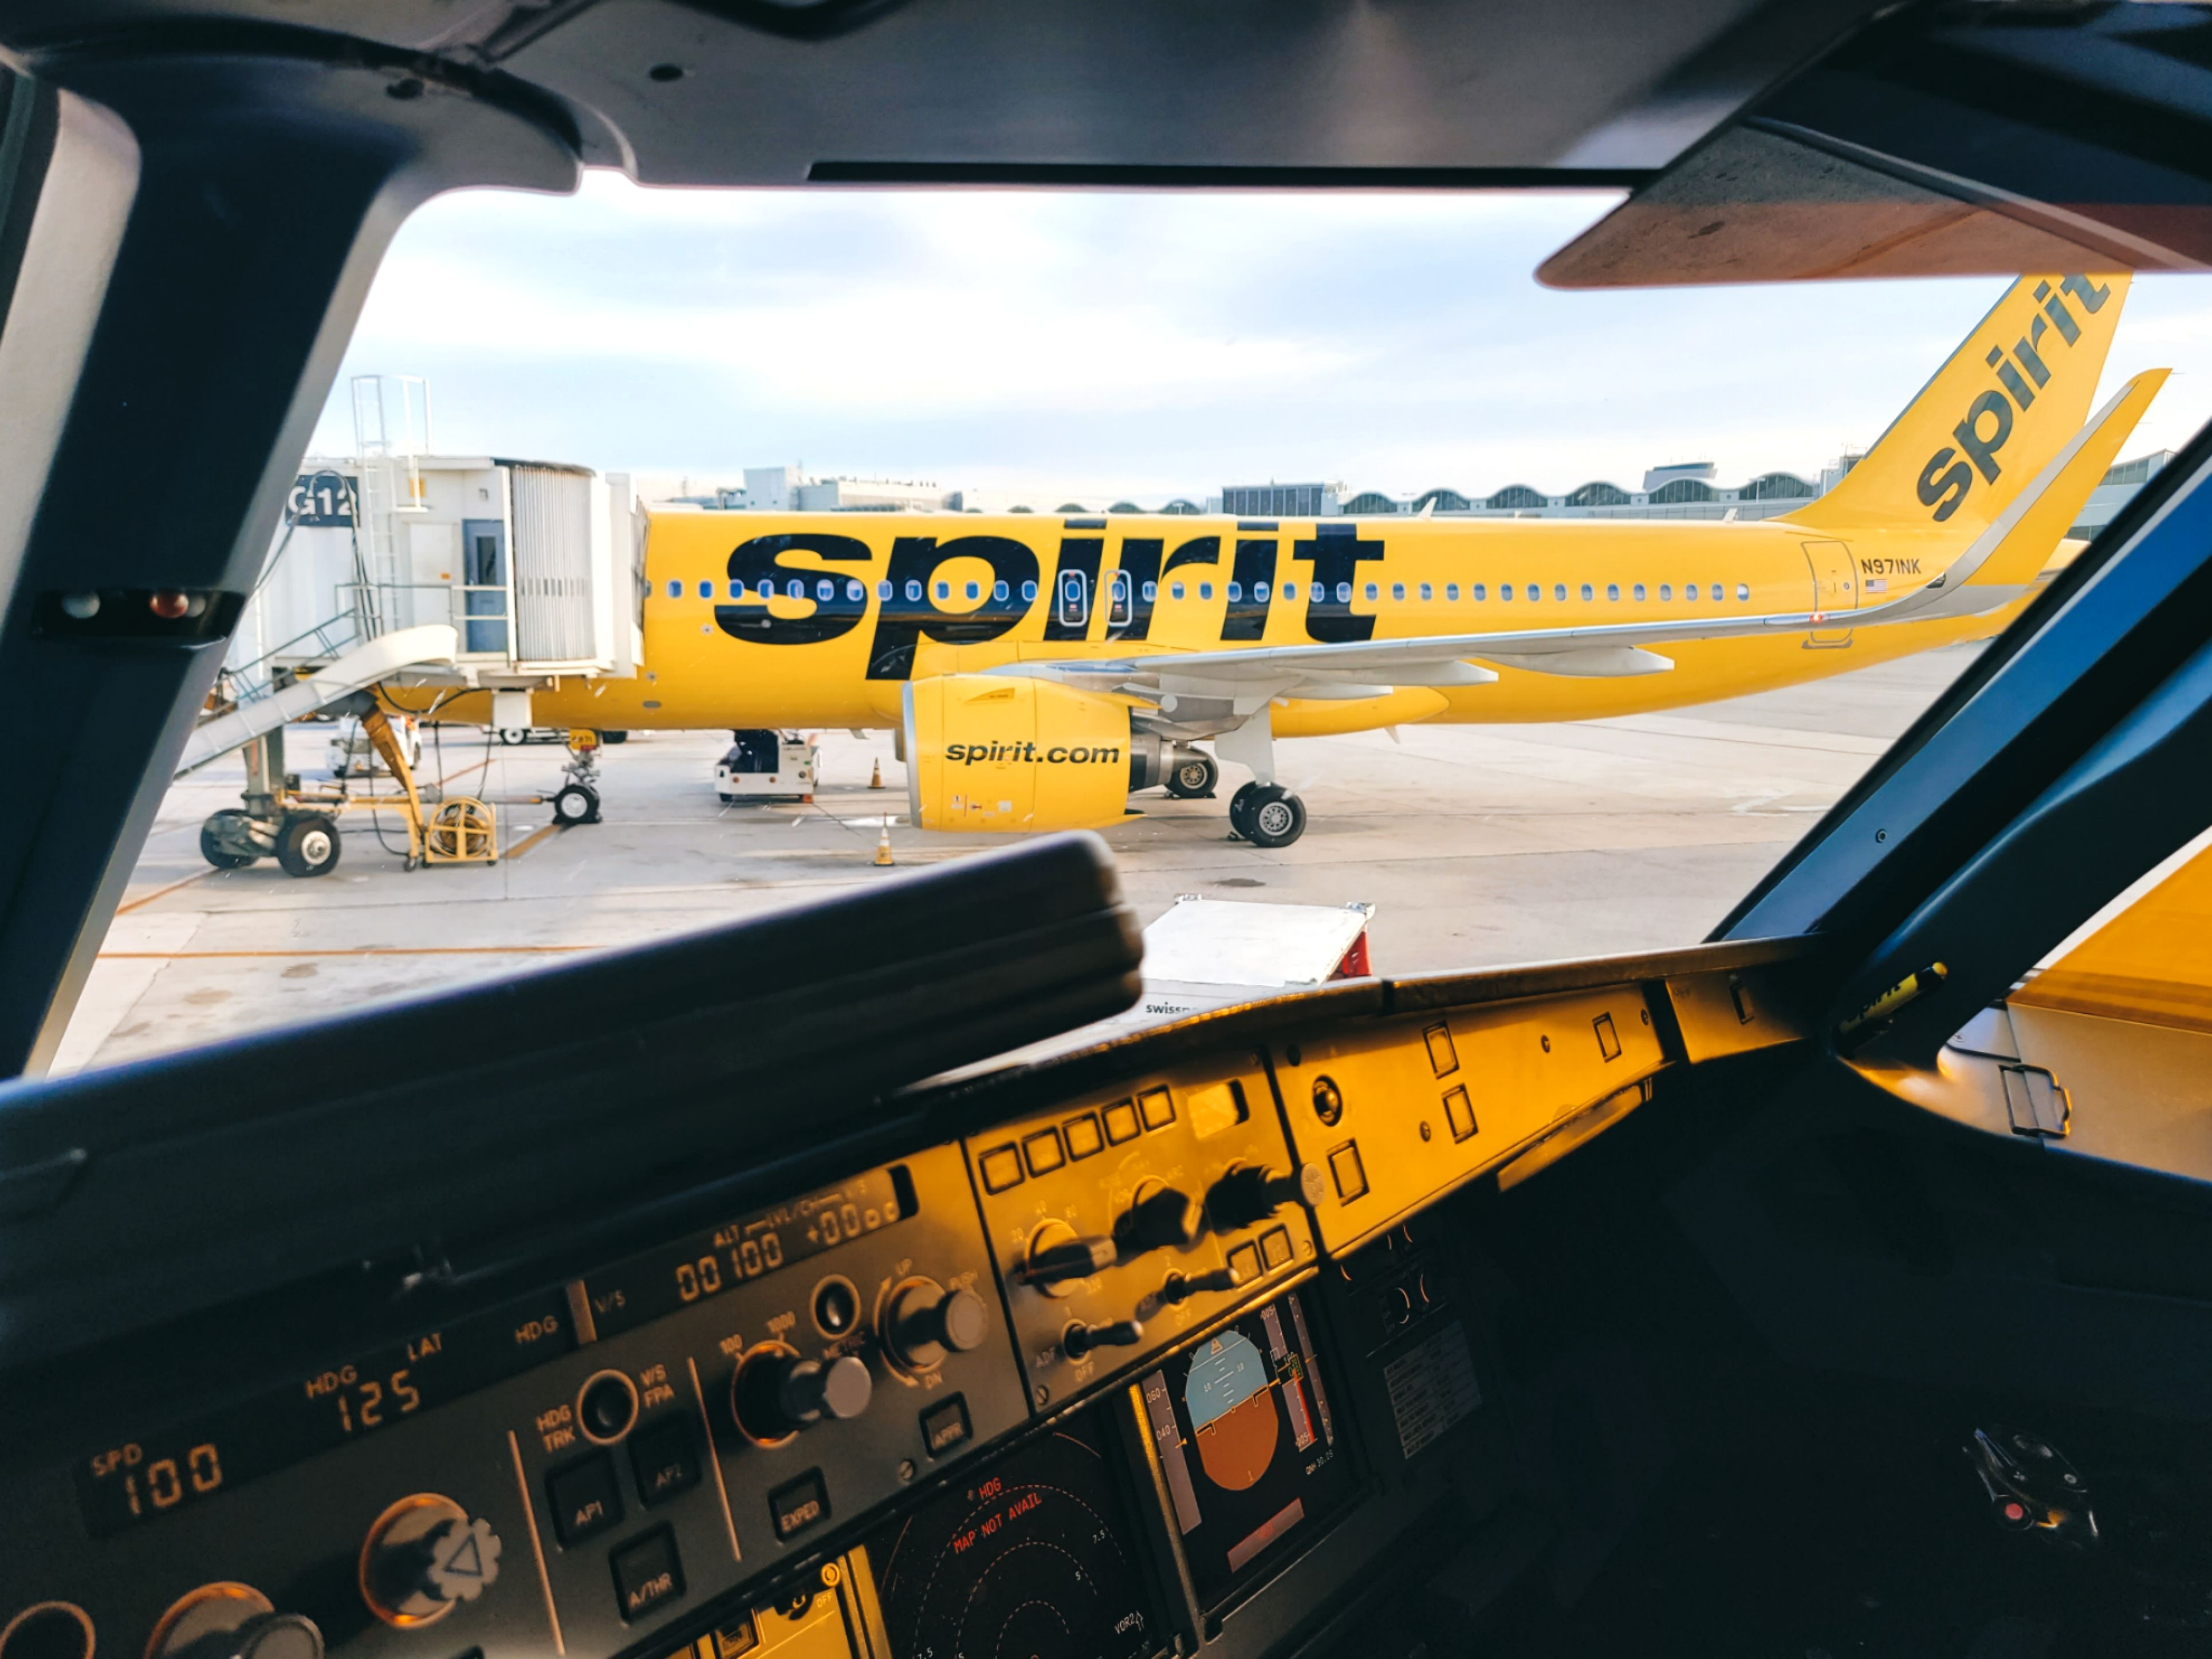 Spirit Airlines A320NEO seen from the cockpit of another aircraft.